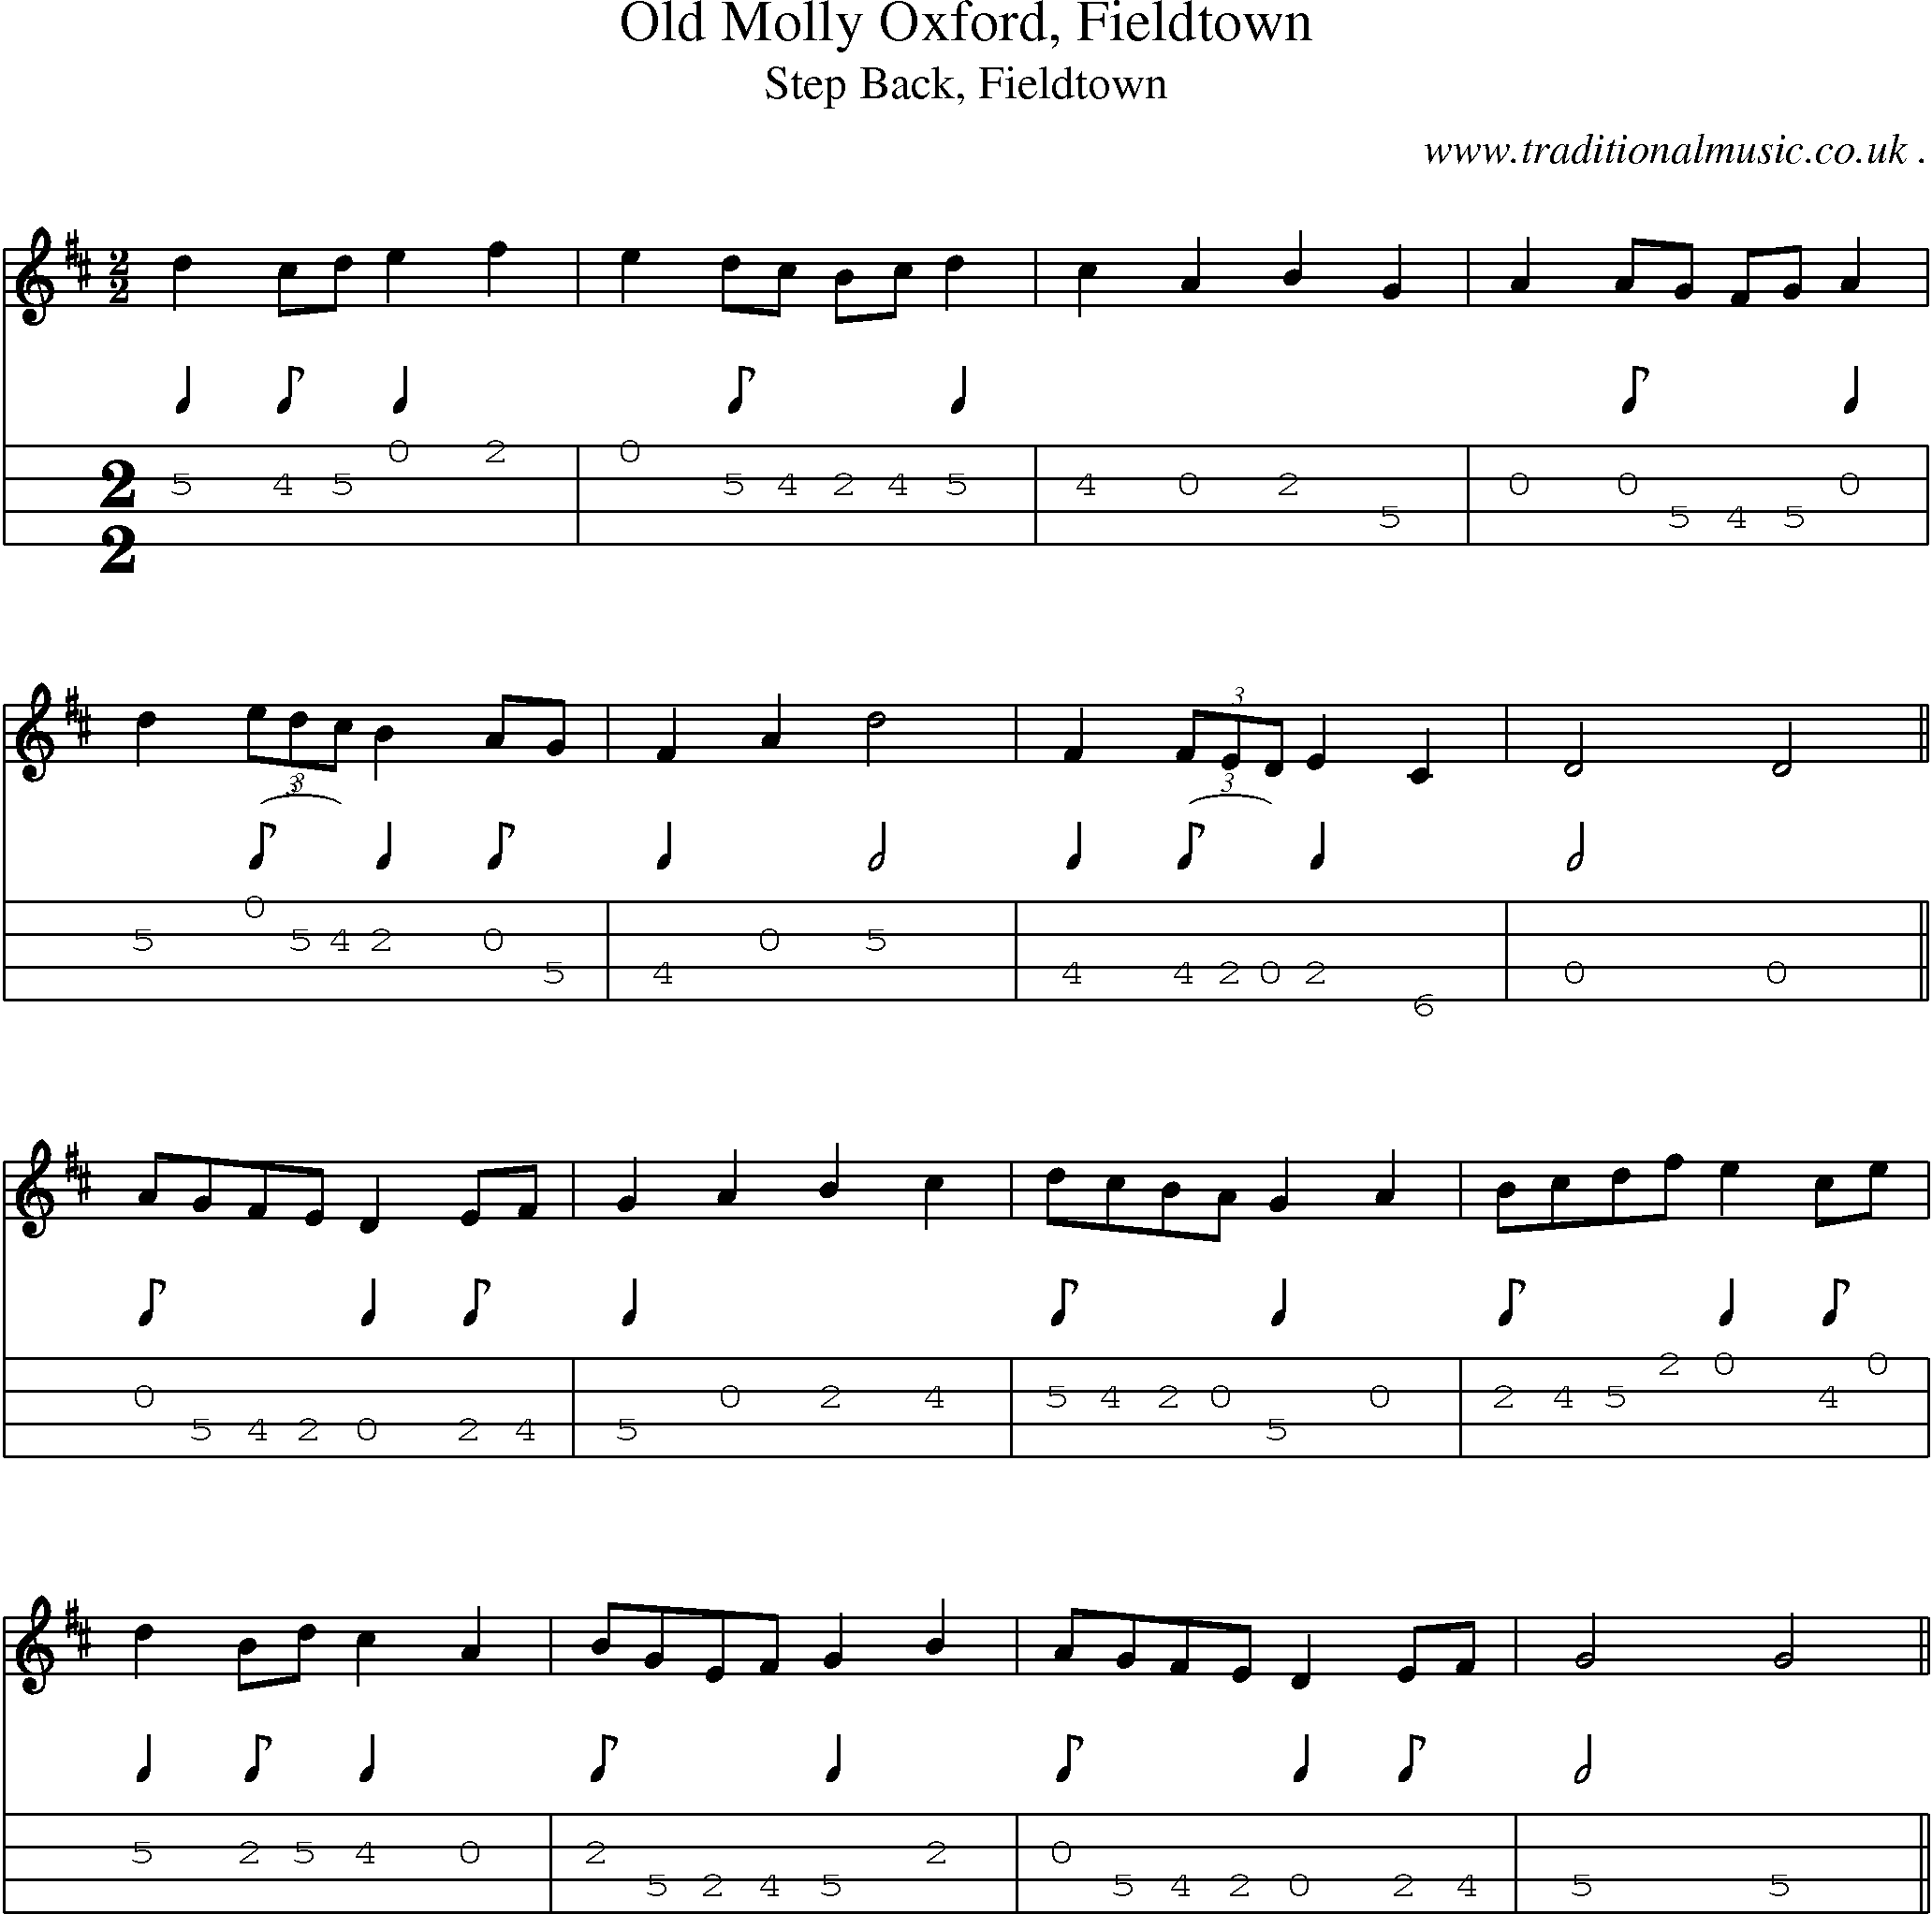 Sheet-Music and Mandolin Tabs for Old Molly Oxford Fieldtown